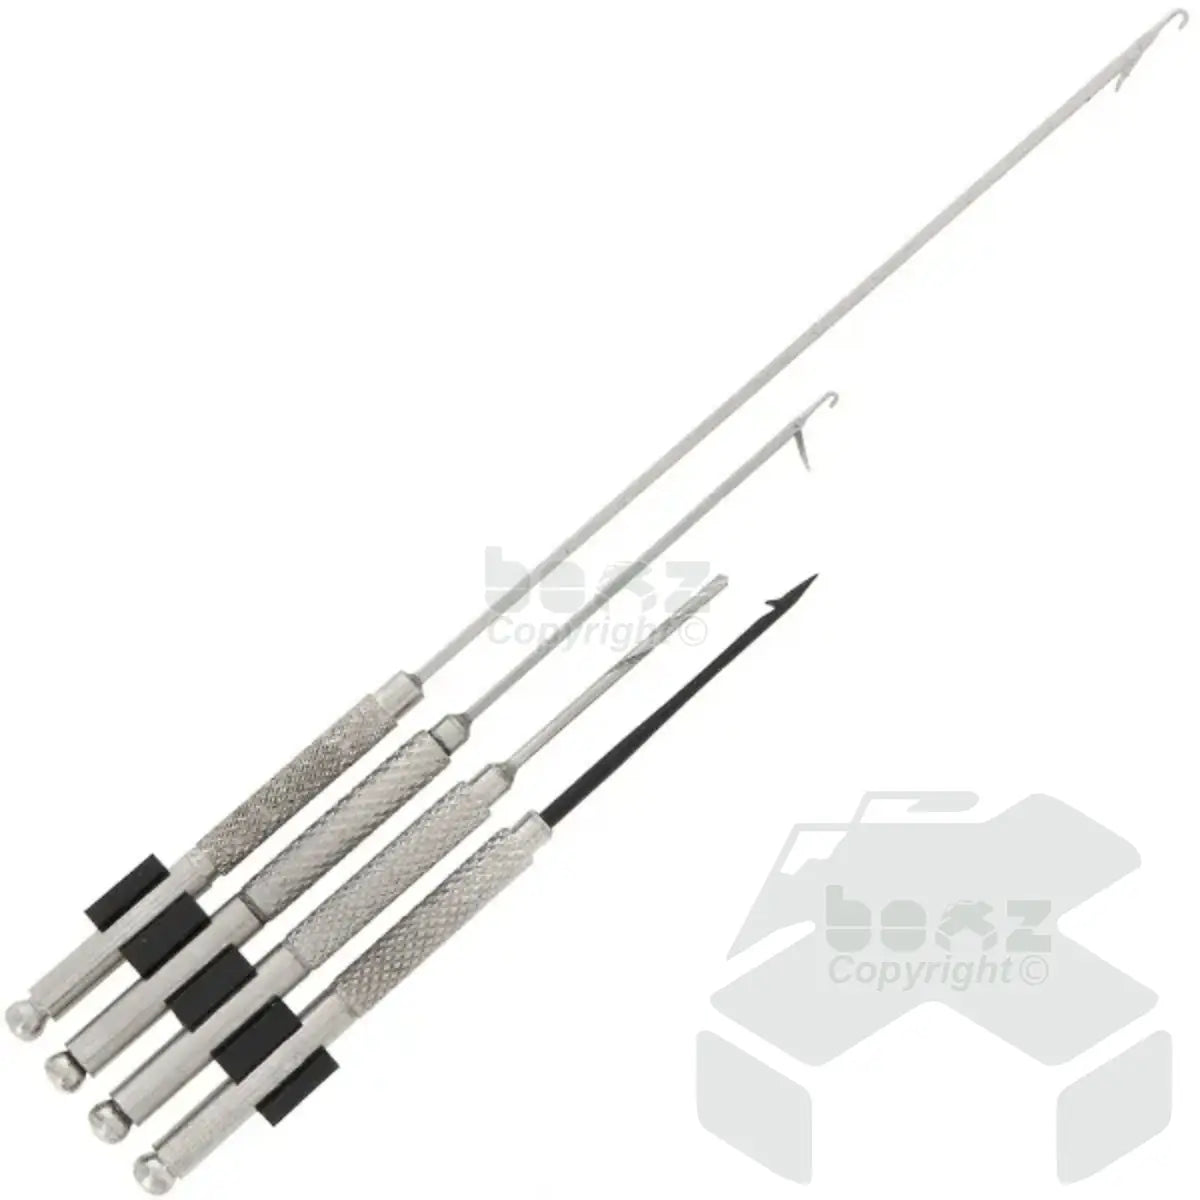 NGT 4pc Stainless Tool Set - PVA Long, PVA Short, Baiting Needle and Drill